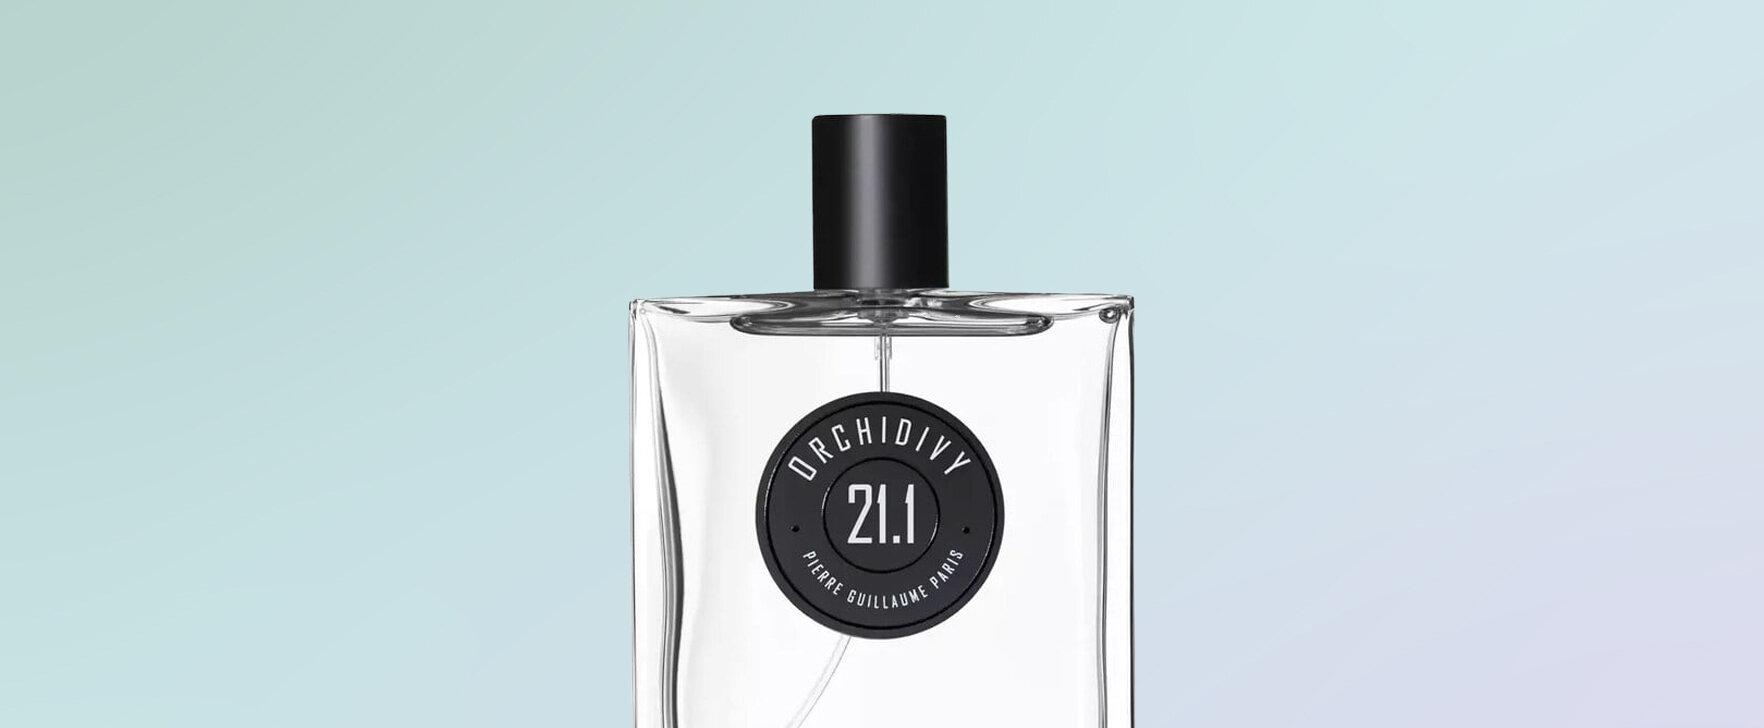 Ivy and Sweet Vanilla: The New Eau de Parfum "21.1 Orchidivy" by Pierre Guillaume